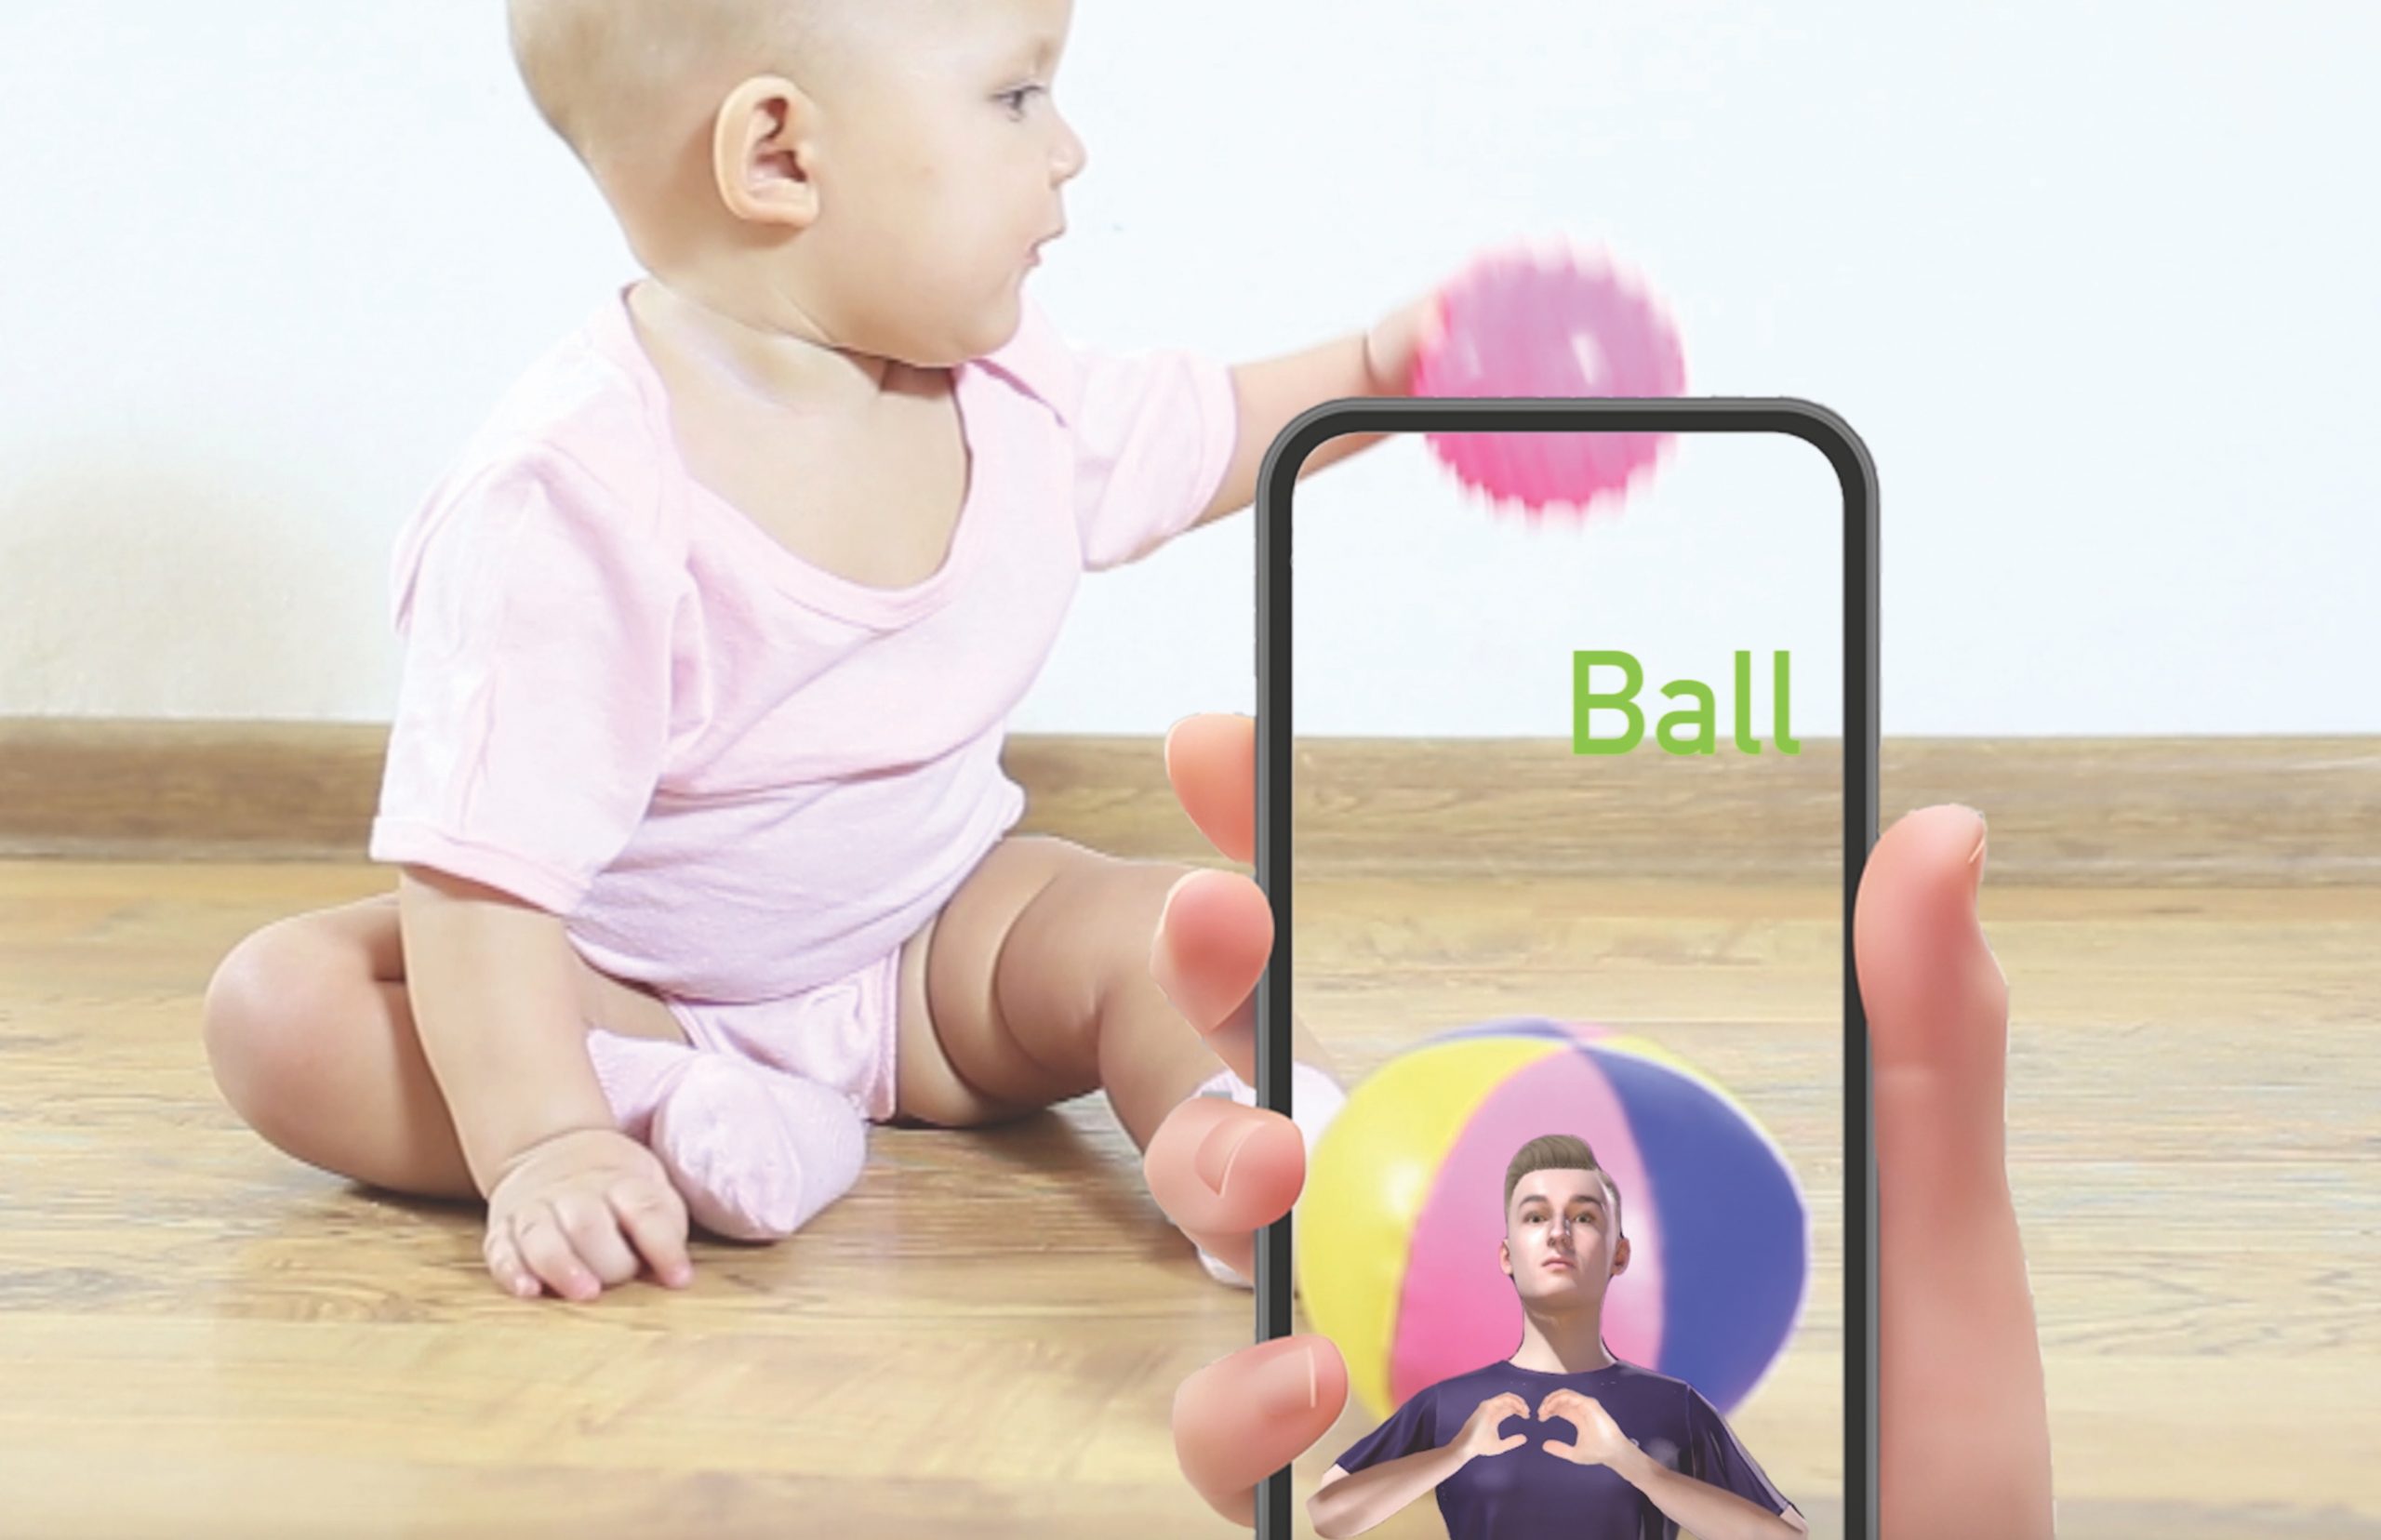 A baby plays with a ball while a hand holds a phone in the foreground